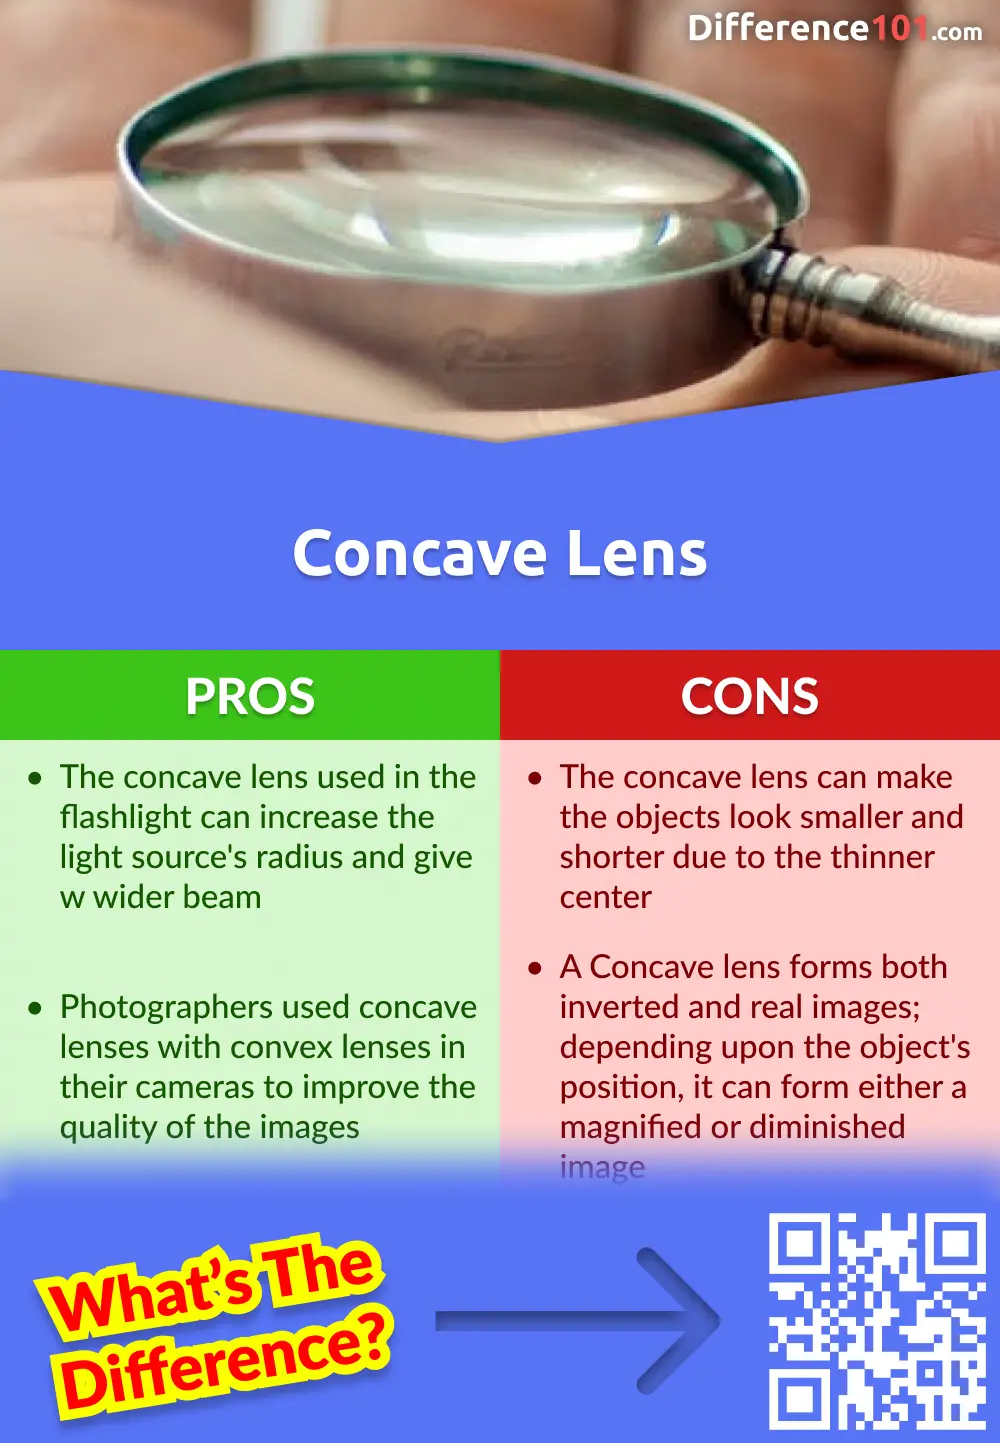 Pros and cons of a Concave Lens